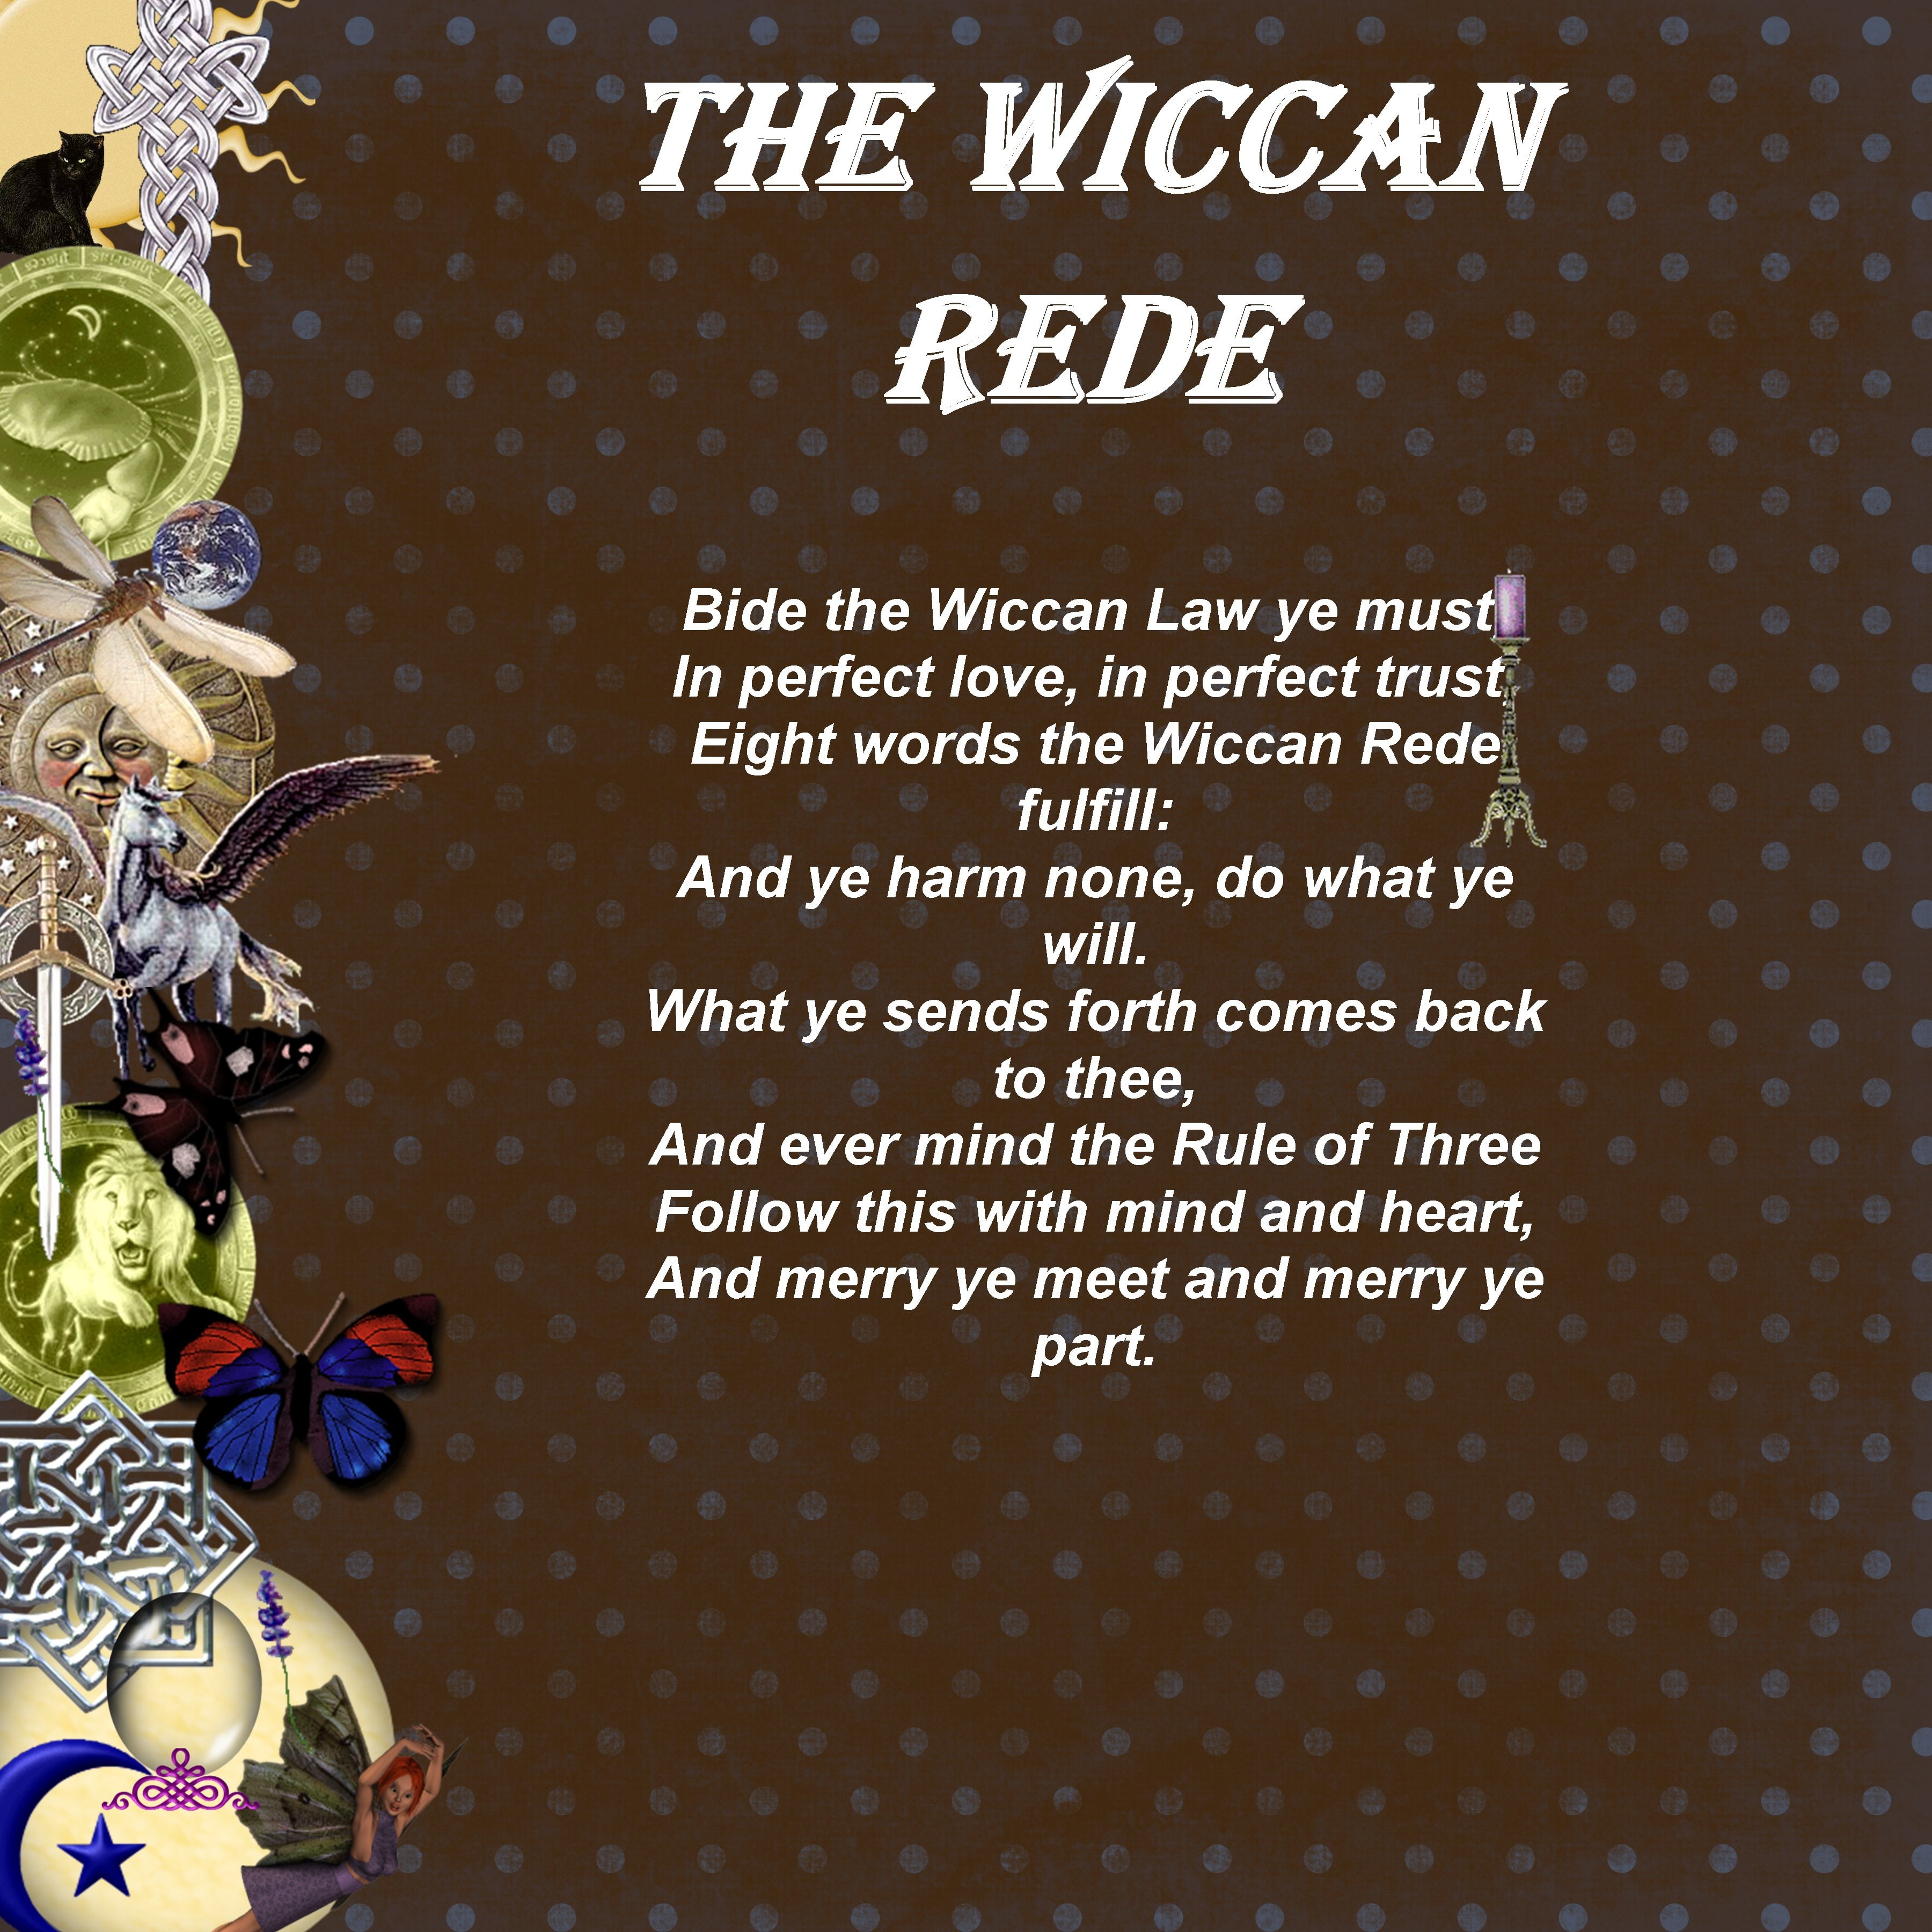 Dark, fantasy, occult, religion, wicca, Wiccan, witch